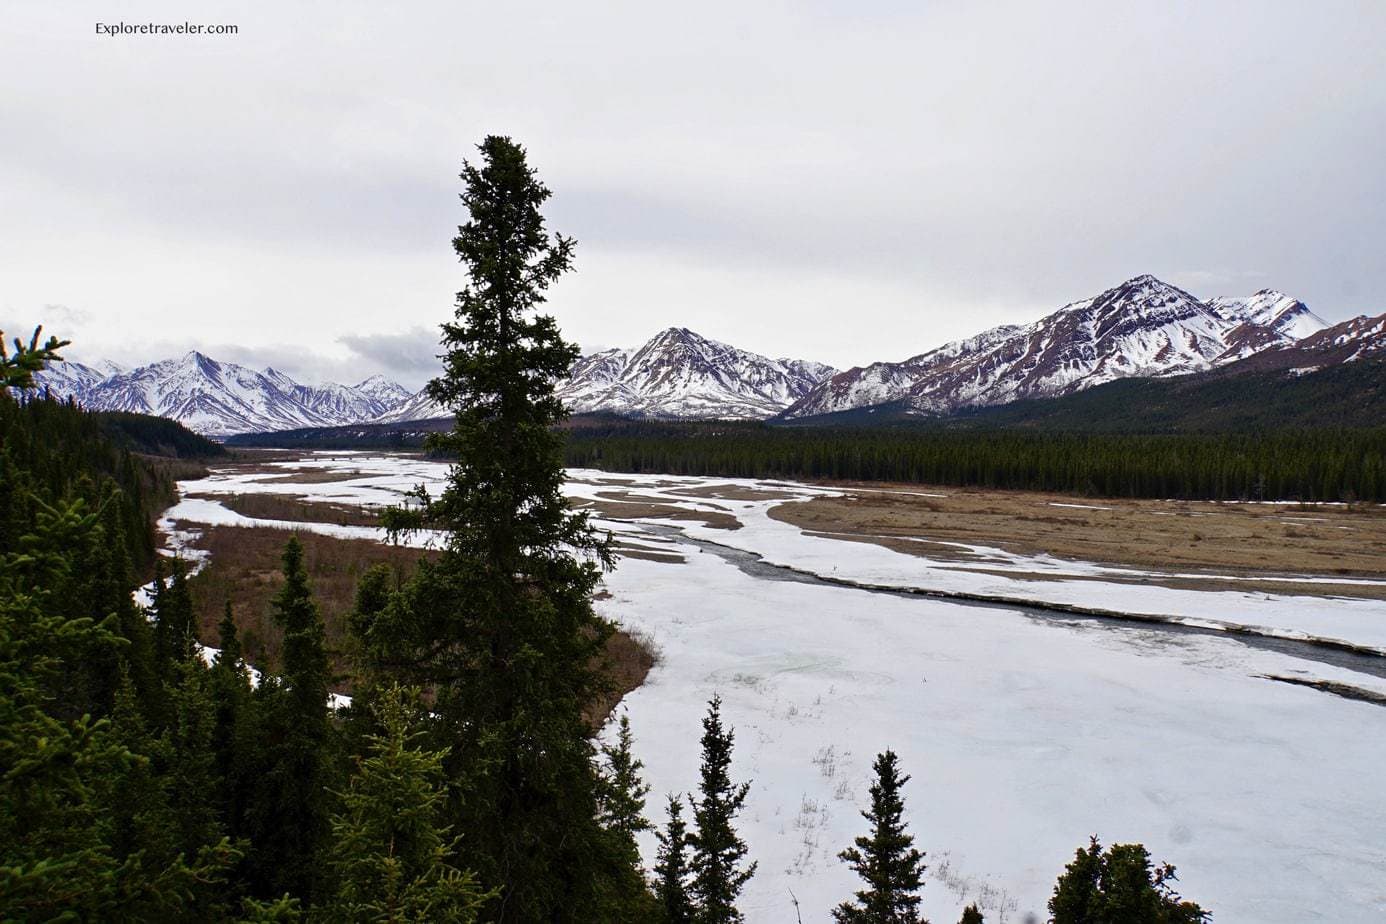 River and mountains of Denali National Park